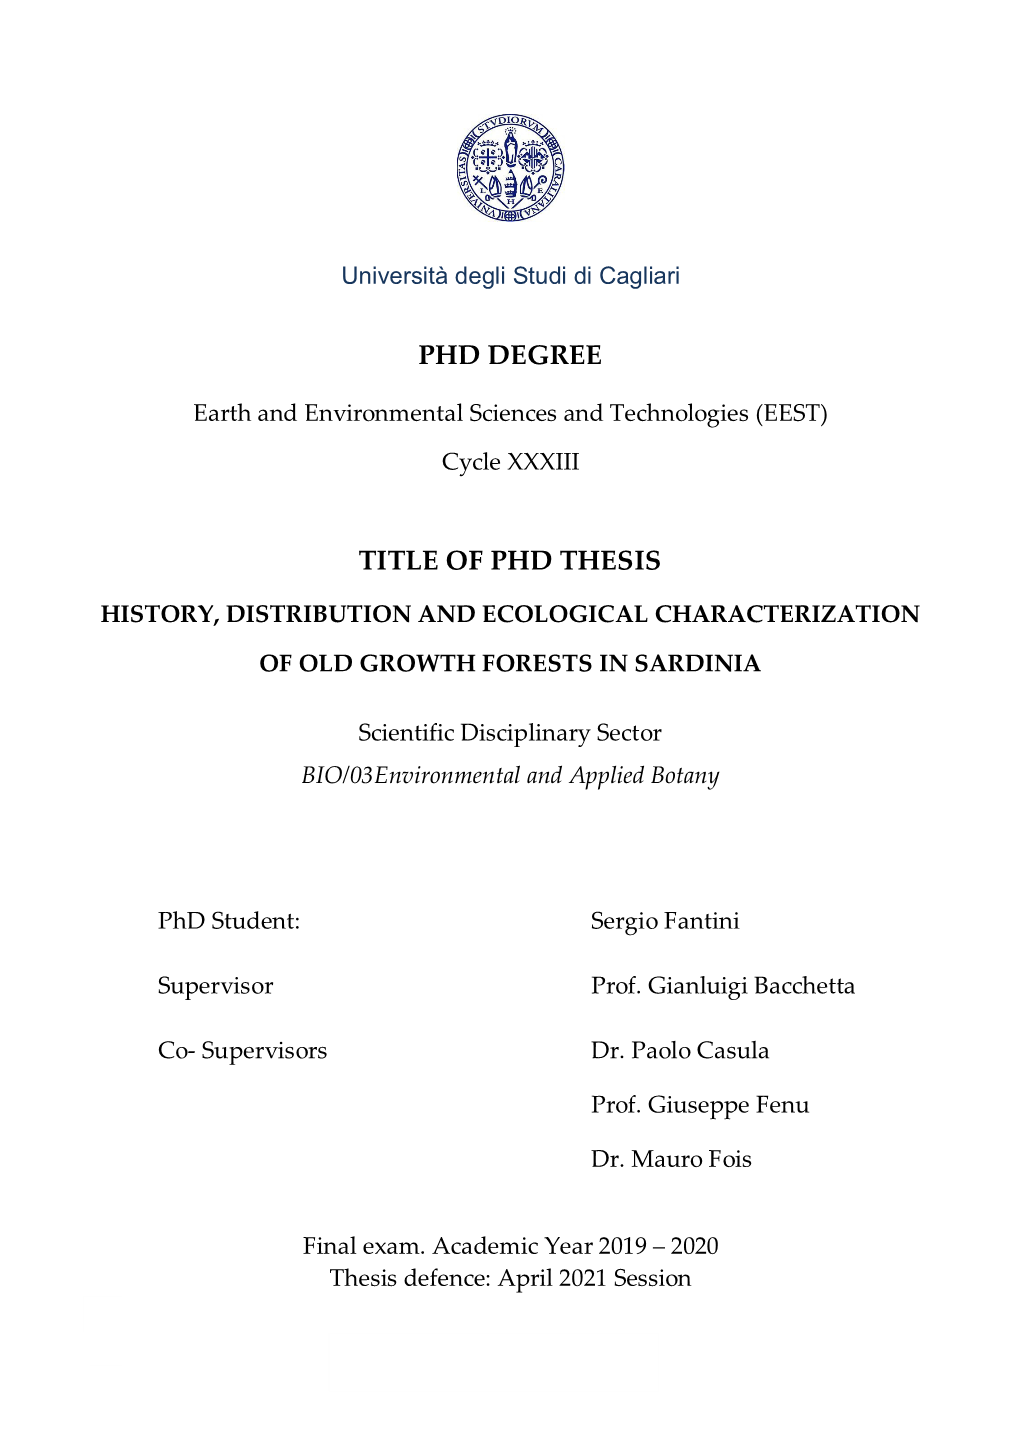 Phd Degree Title of Phd Thesis